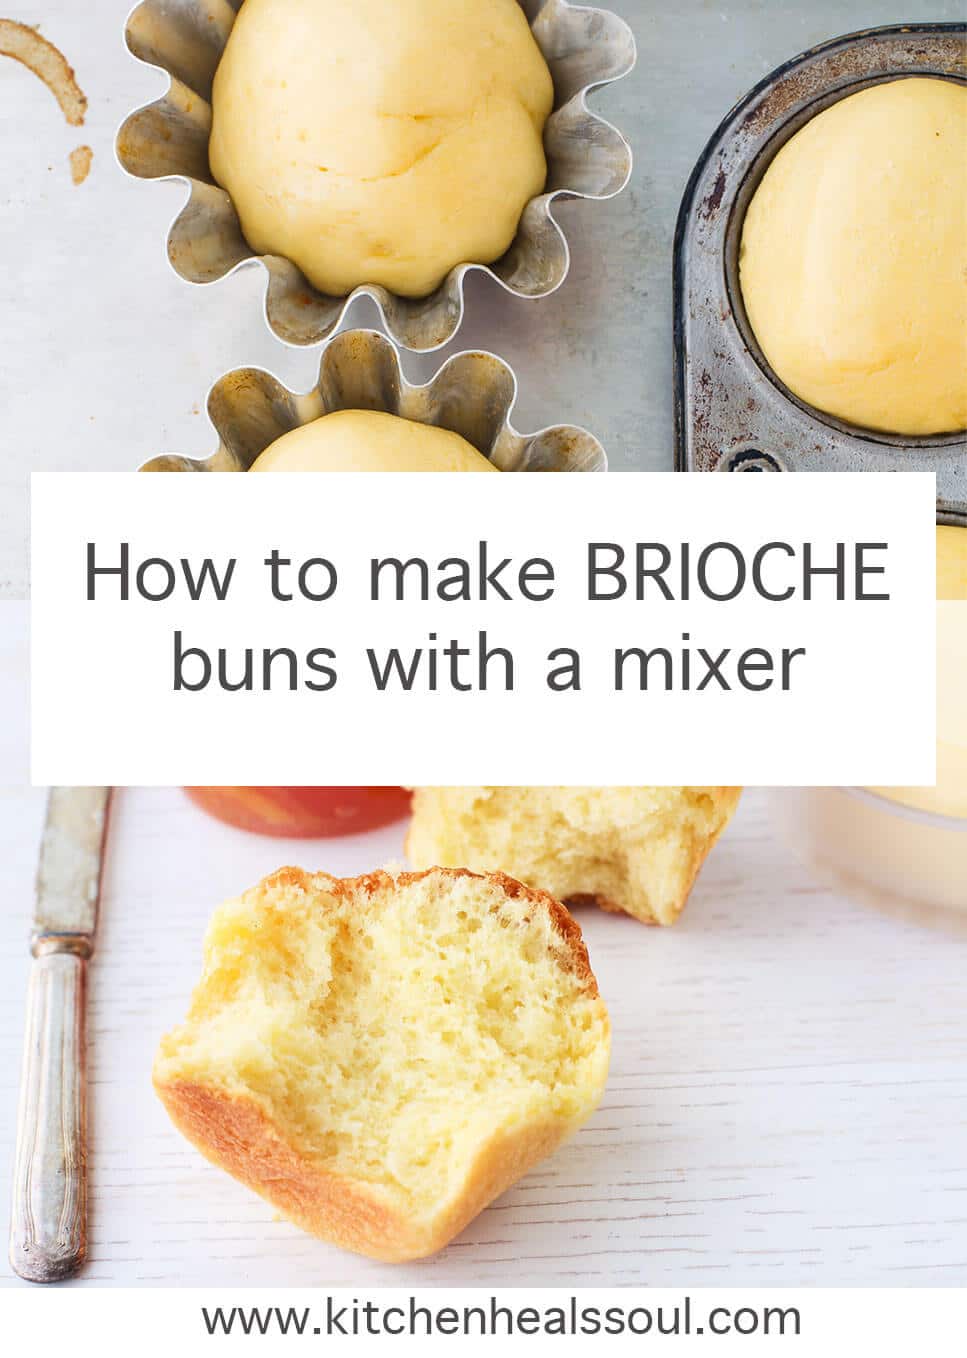 How to make brioche buns with step-by-step photos to show buns before and after baking.